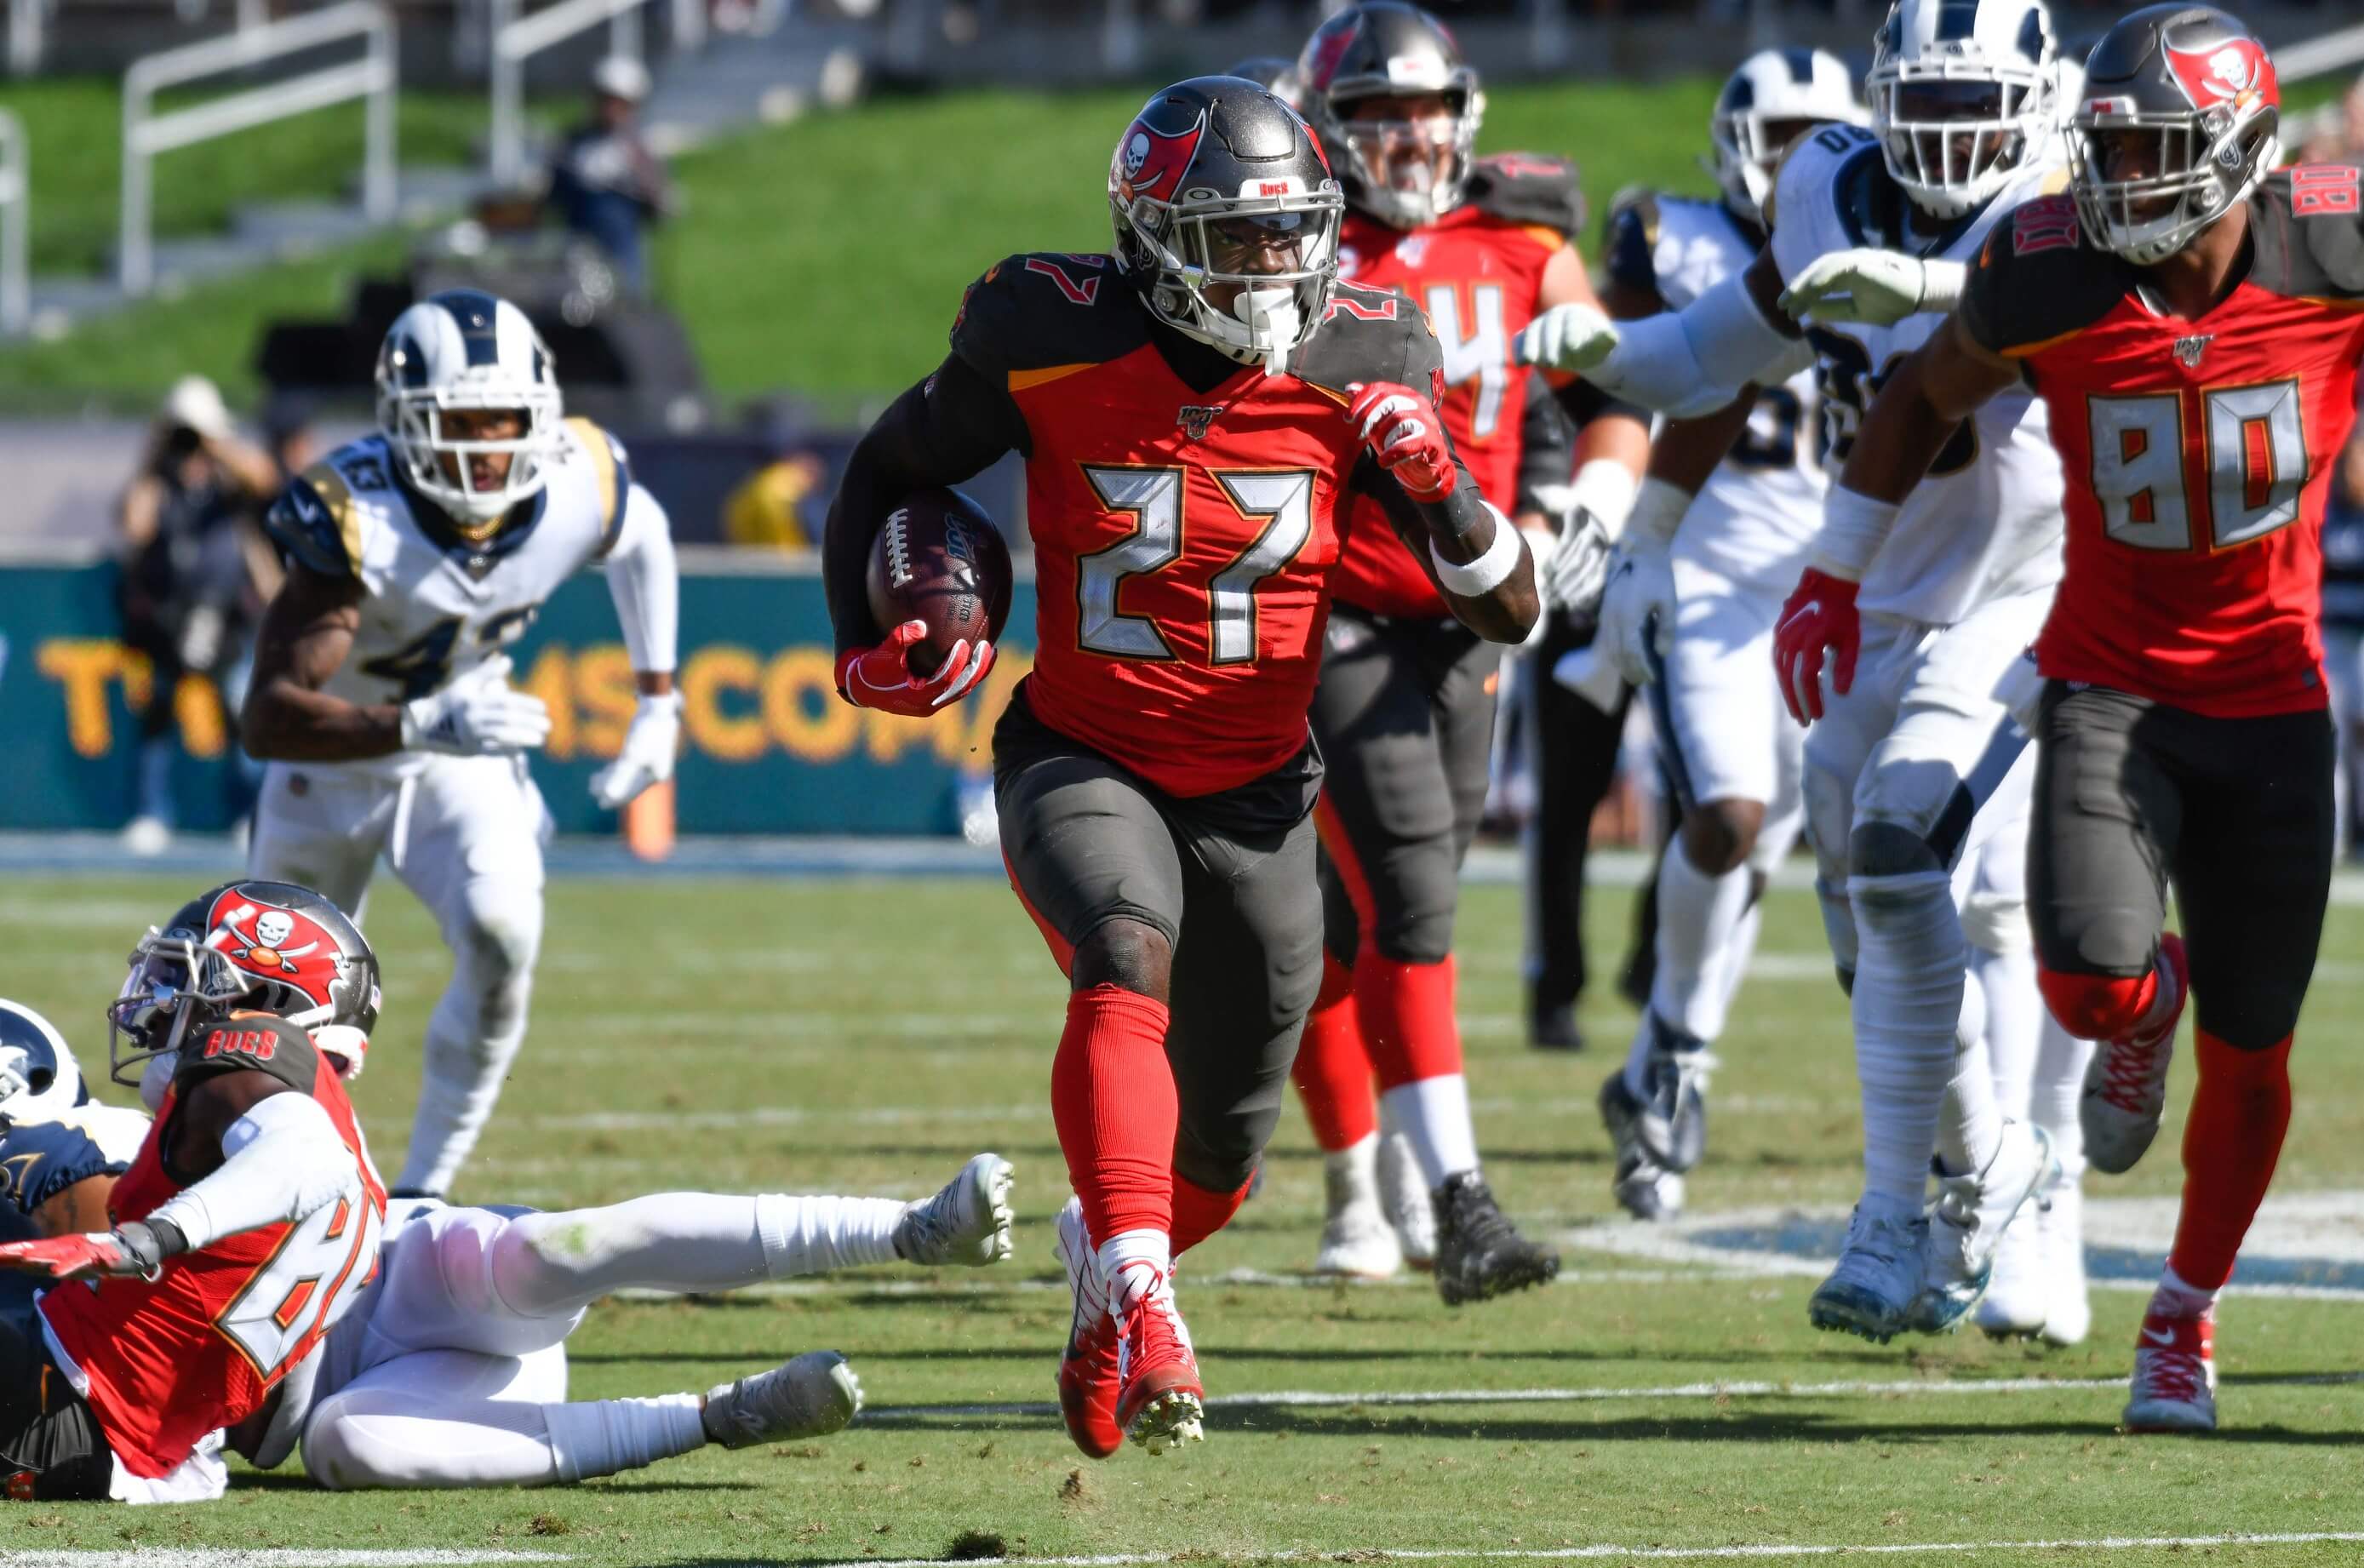 Tampa Bay Buccaneers running back Ronald Jones (27) runs through the Los Angeles Rams defense during the 2nd half at Los Angeles Memorial Coliseum on Sept 29, 2019. It is the one of the highest scoring games in NFL history.